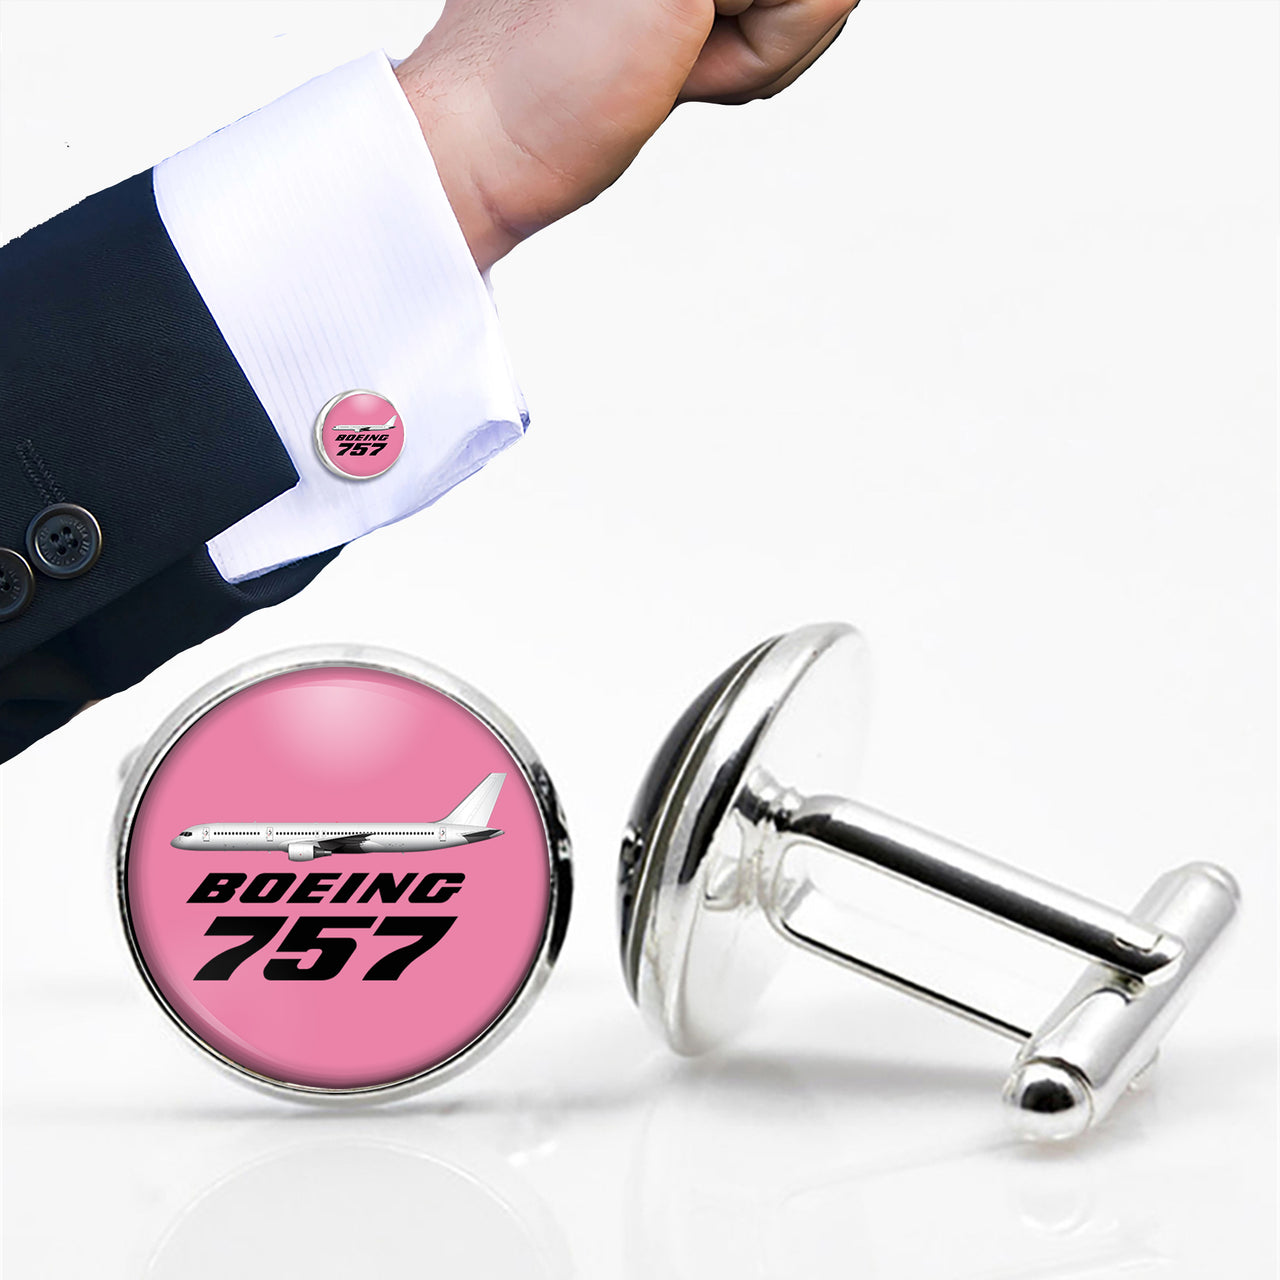 The Boeing 757 Designed Cuff Links